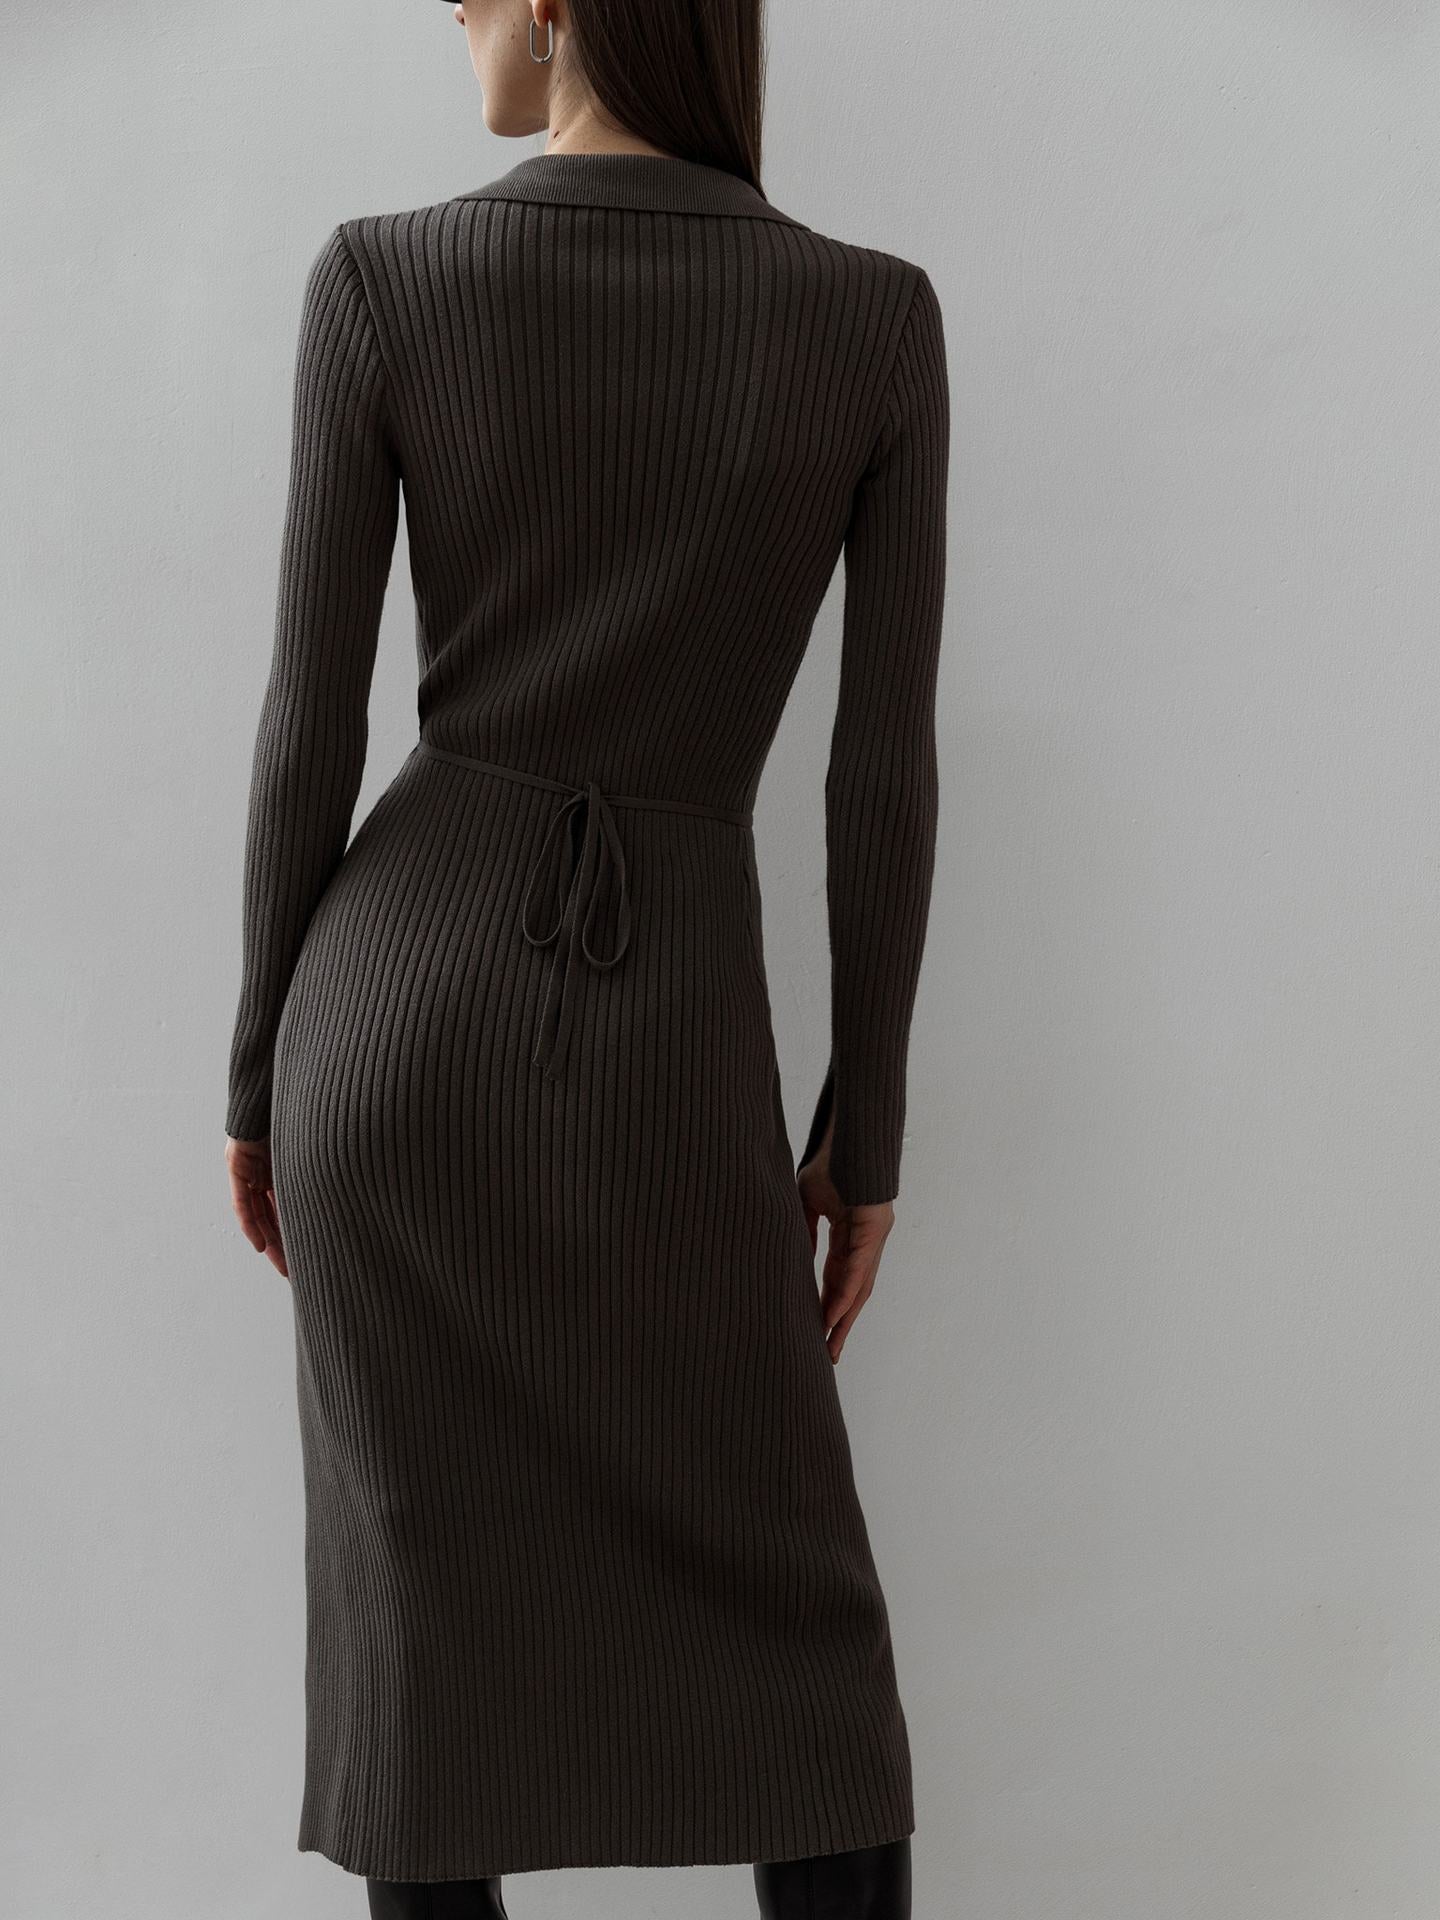 Knitted Dress Mid Length Tight Dress